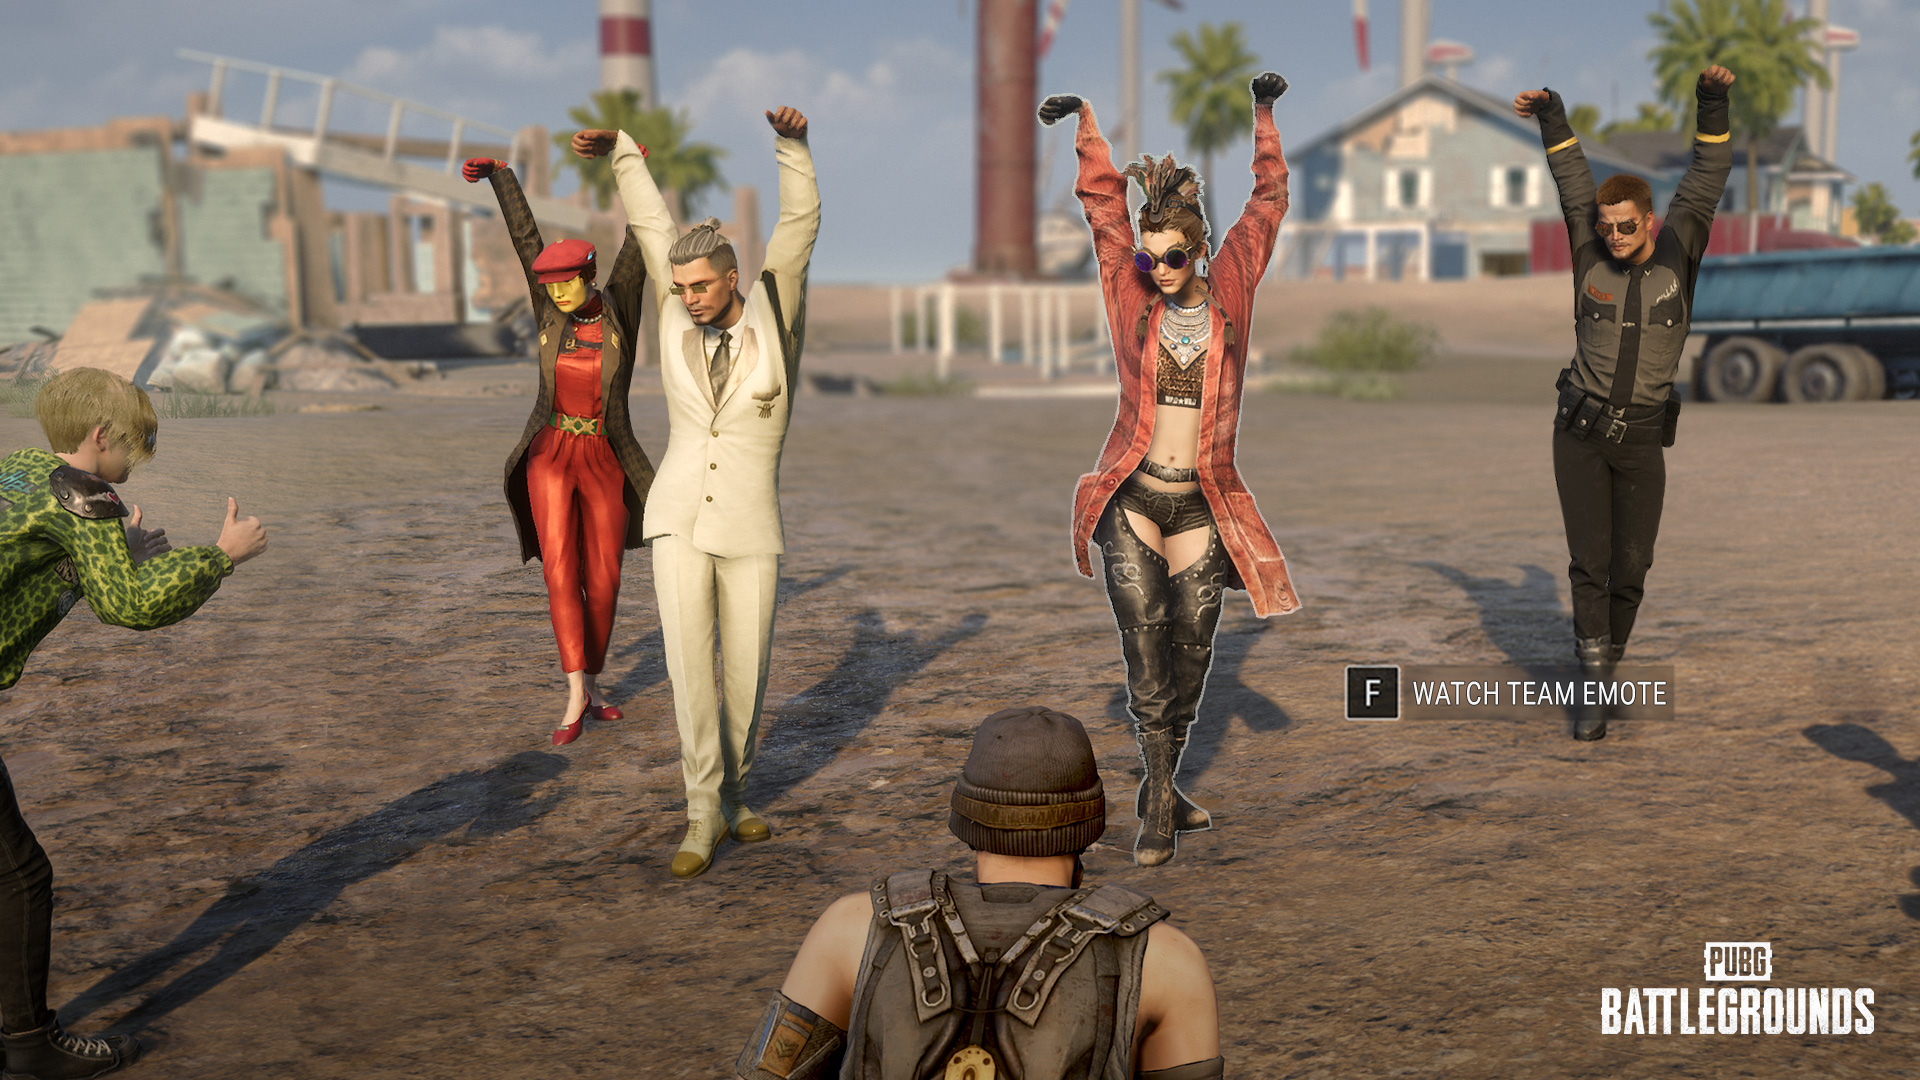 Playerunknown's Battlegrounds characters dancing in fancy outfits